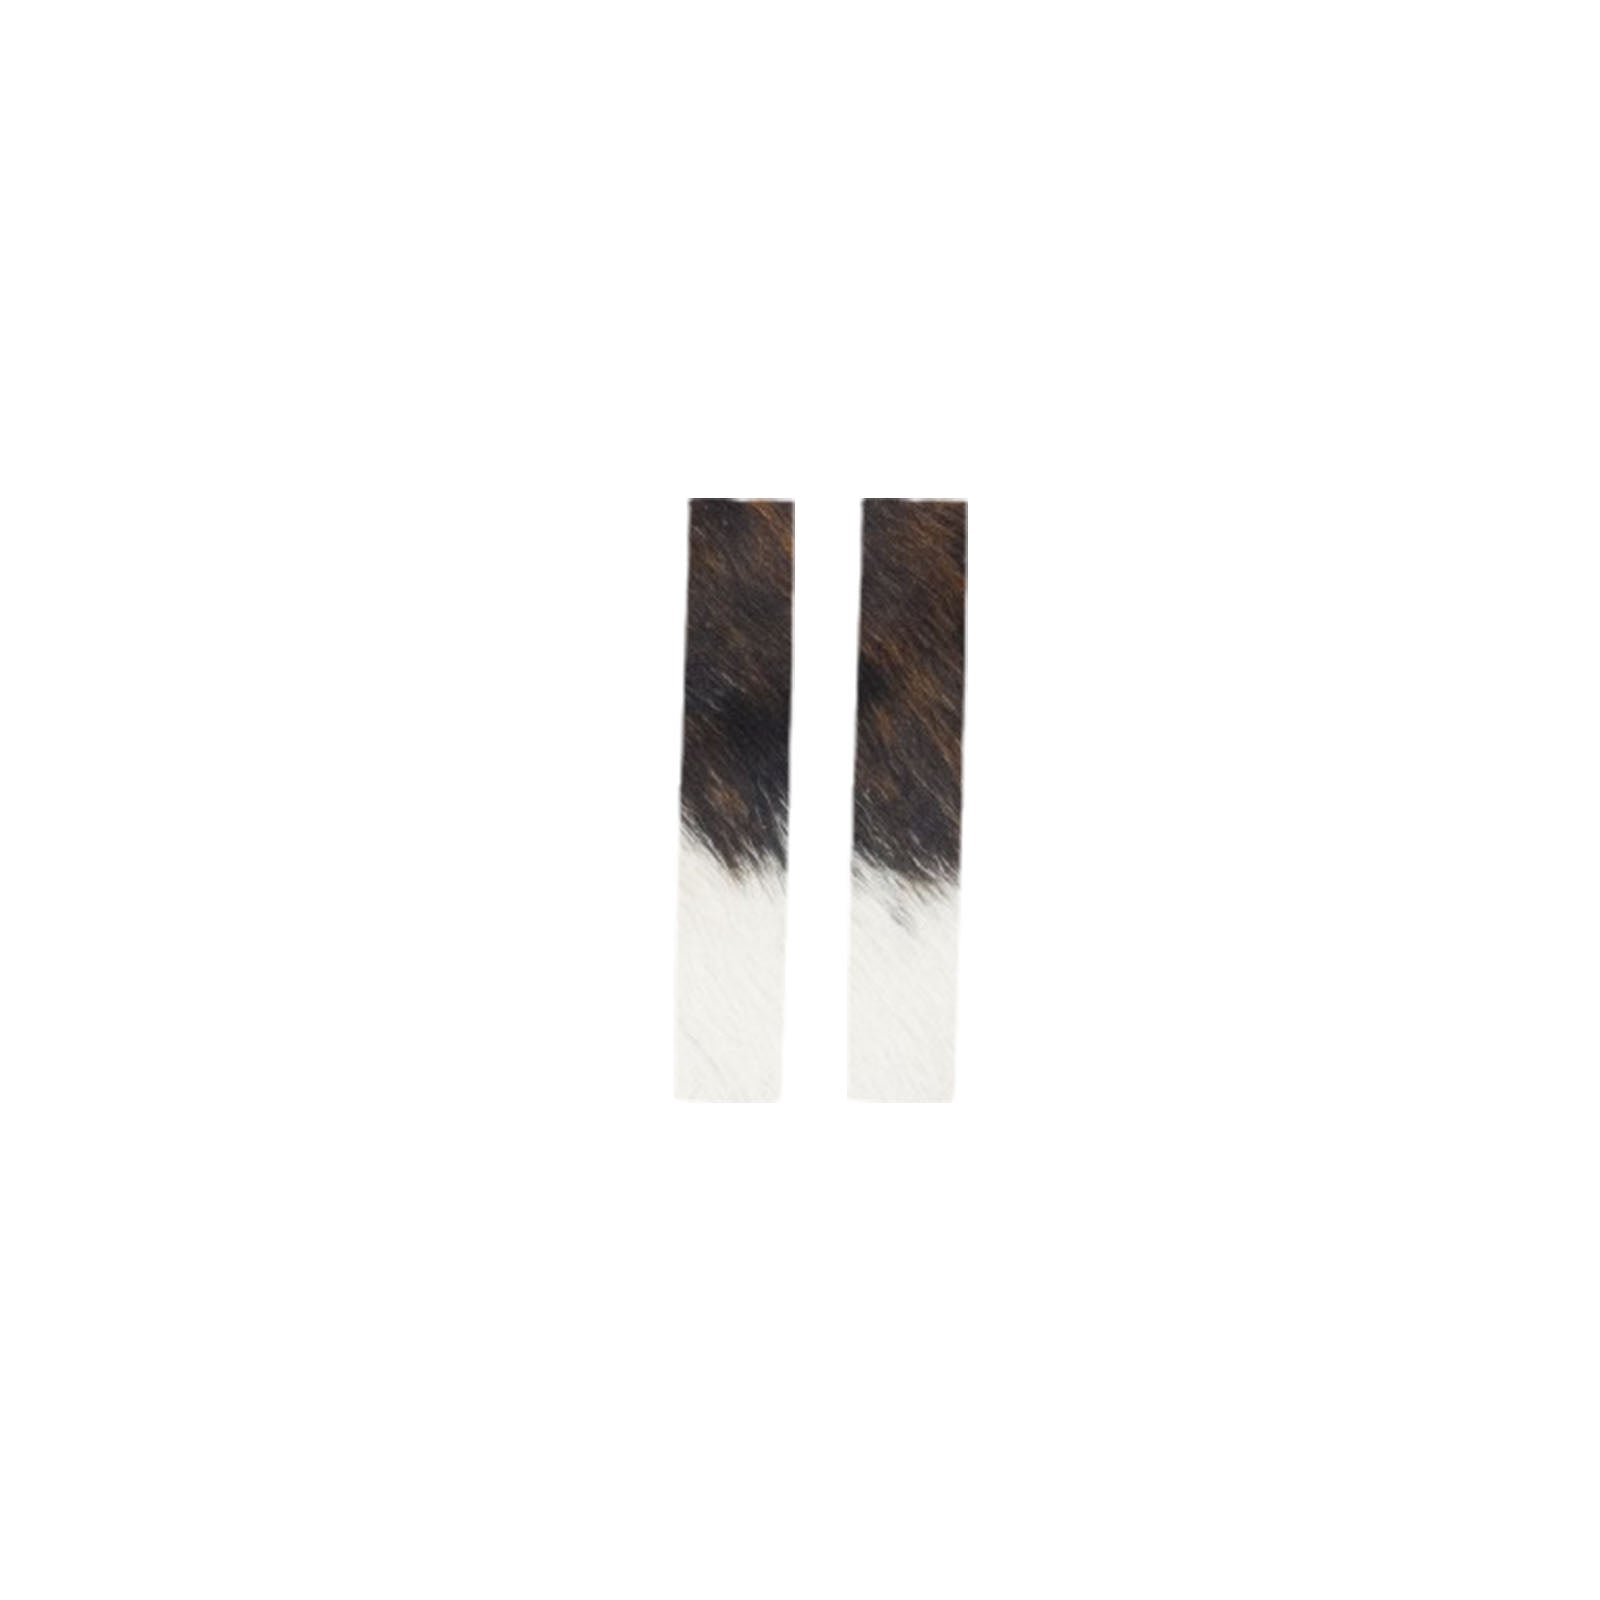 Tri-Colored Black/Brown/Off White Hair On Die Cut Earrings, Rectangle | The Leather Guy